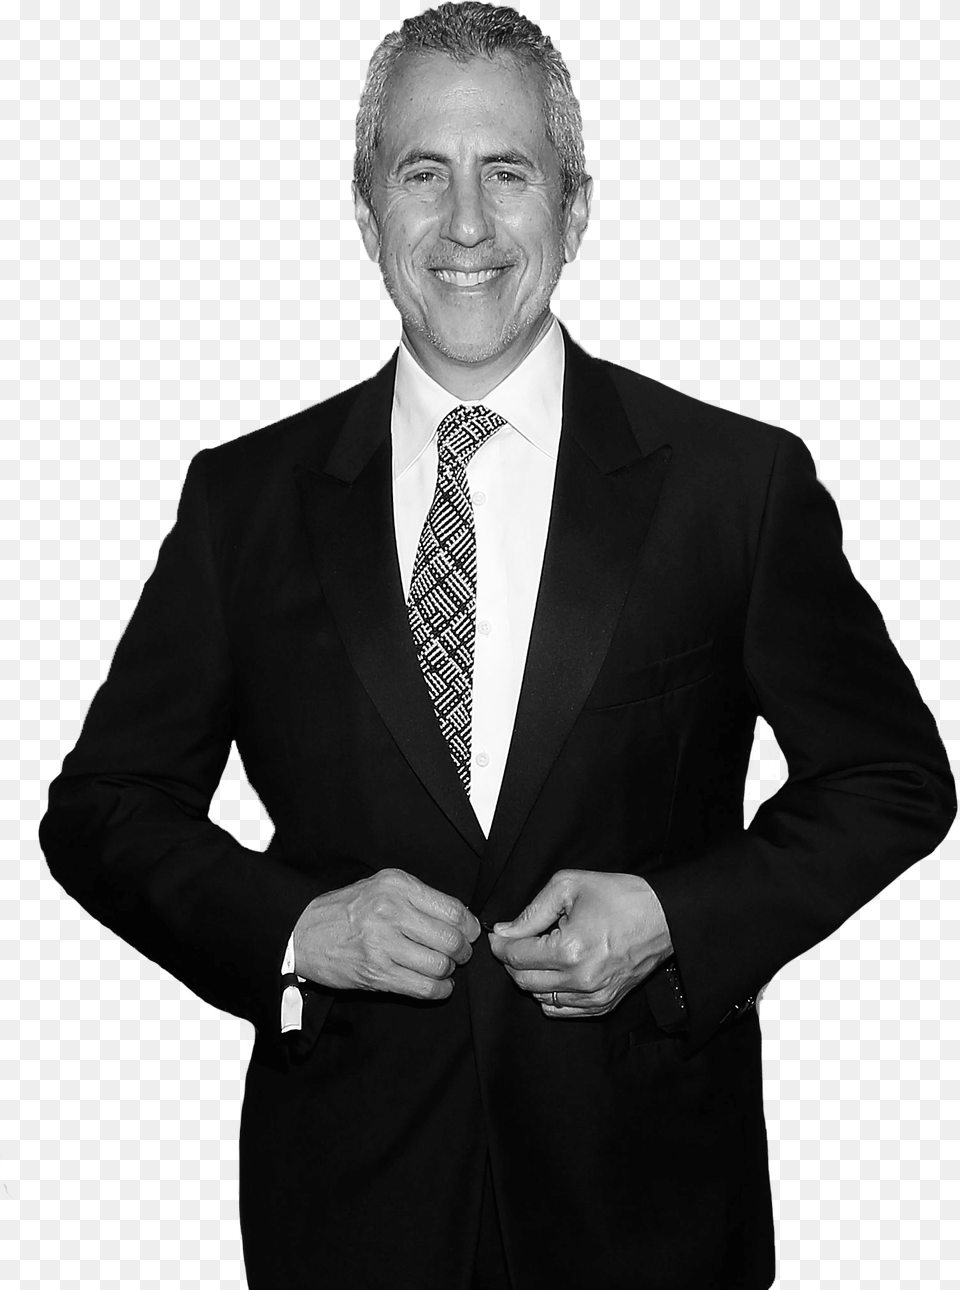 Danny Meyer Founder Of Shake Shack Photography, Accessories, Tie, Suit, Portrait Free Png Download